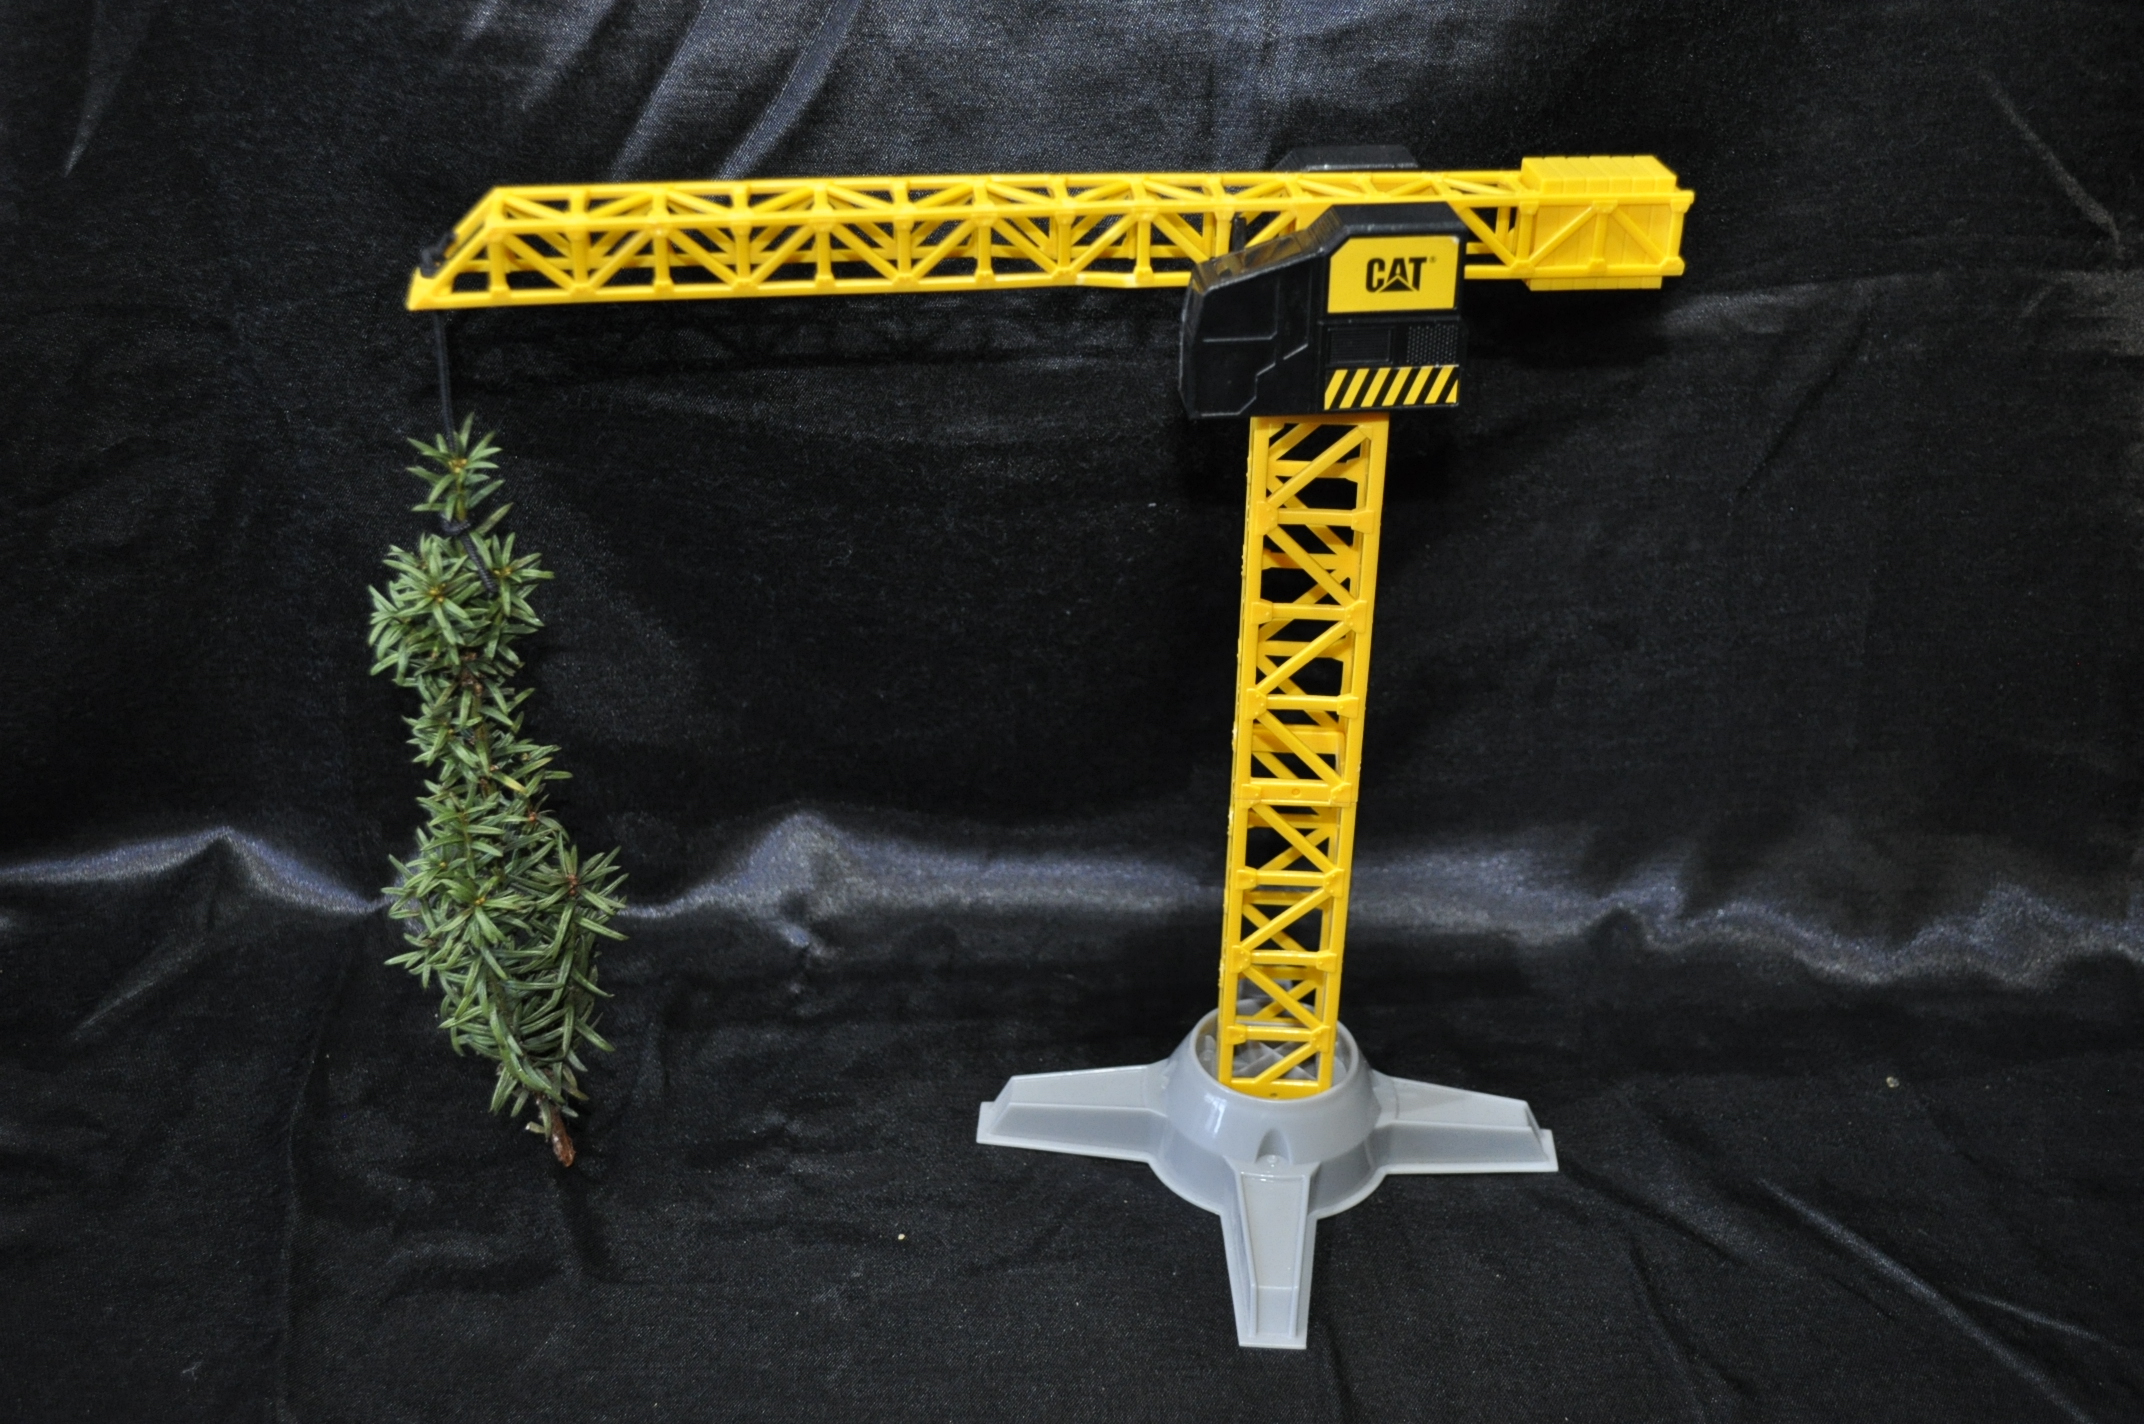 The Russian invasion of Ukraine is recognised by an a yellow crane carrying a yew sprig (Trevor Prideaux/PA)